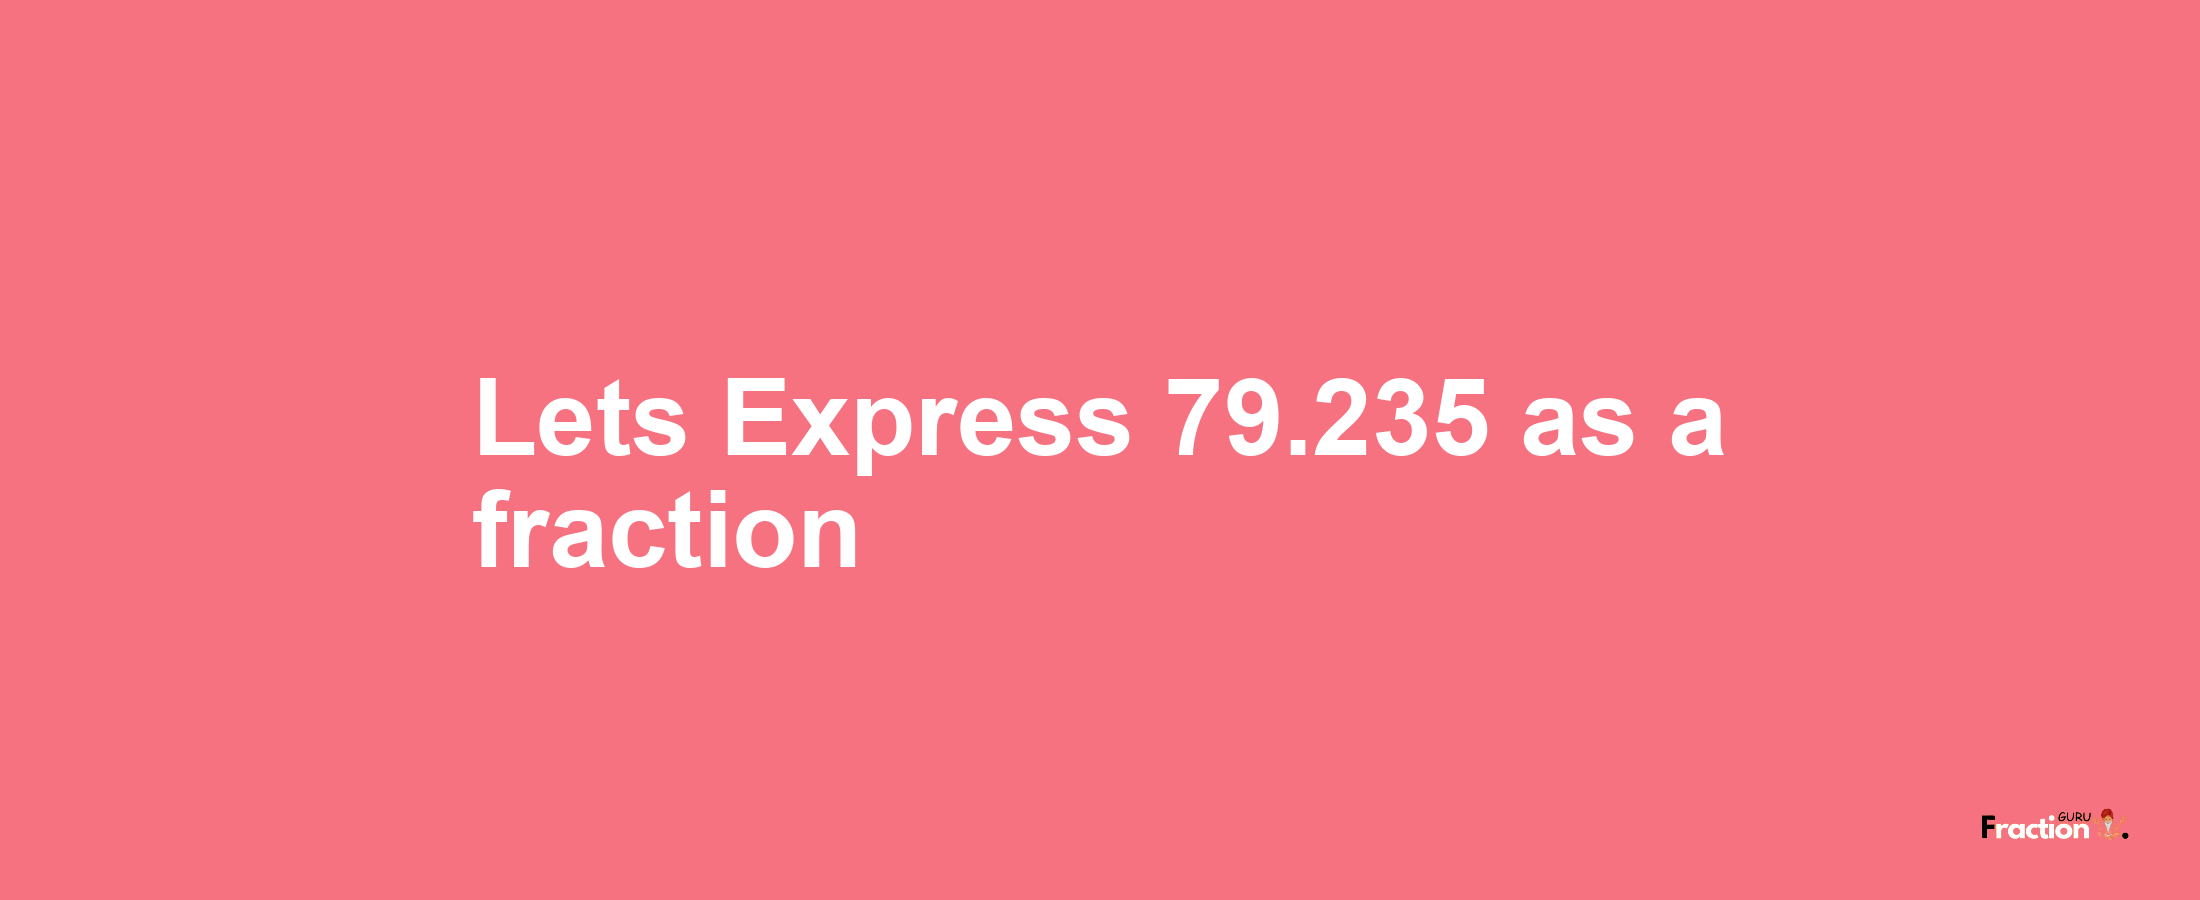 Lets Express 79.235 as afraction